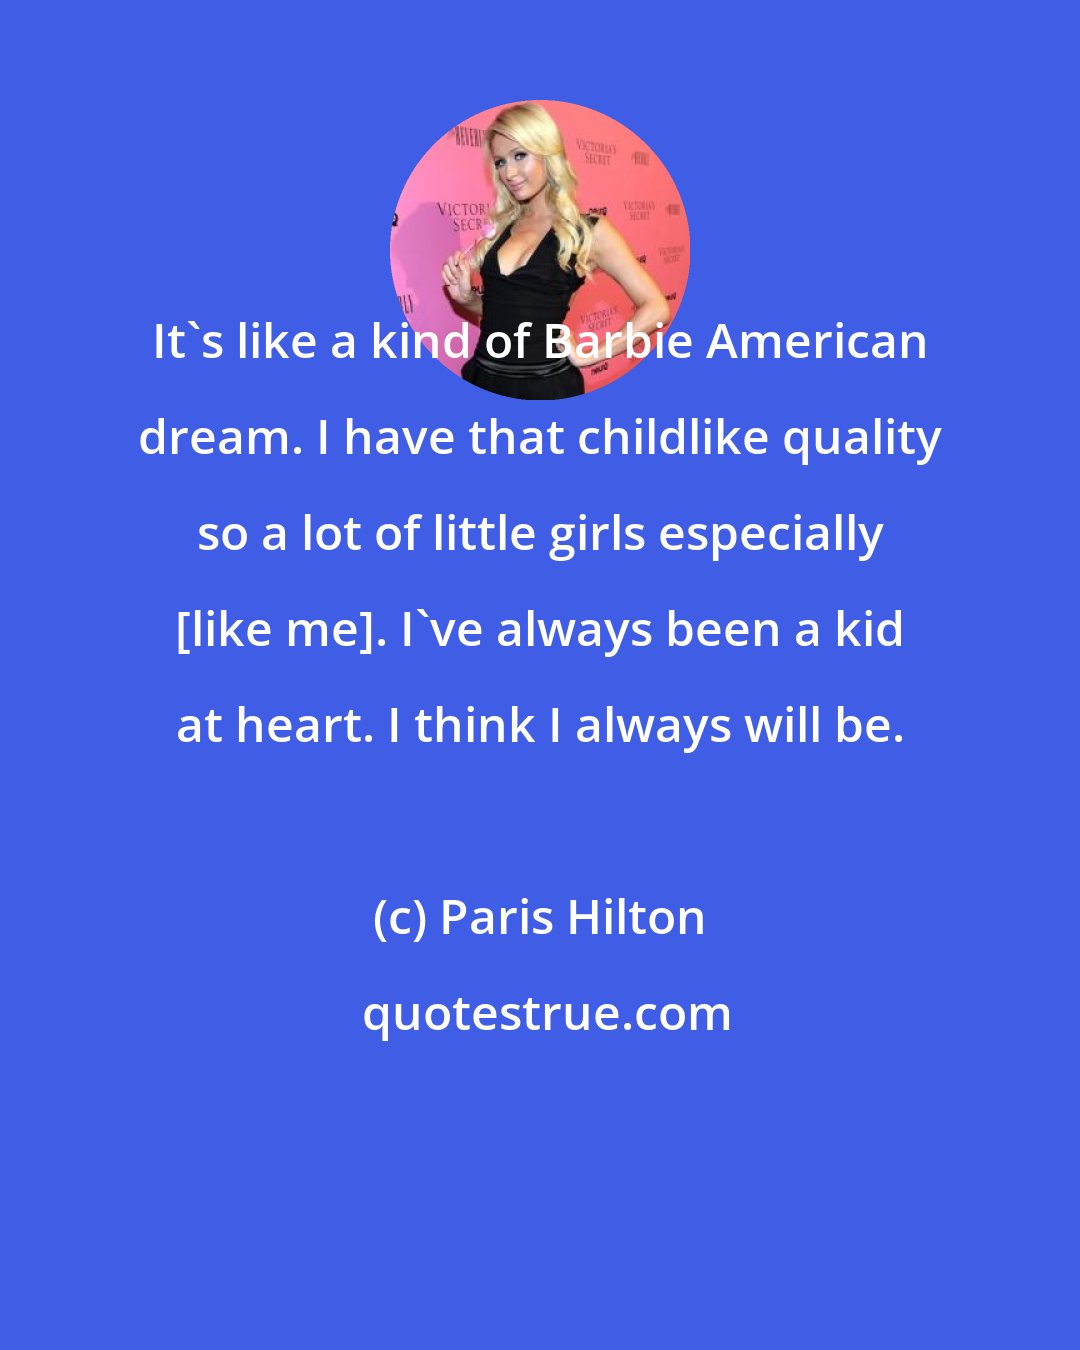 Paris Hilton: It's like a kind of Barbie American dream. I have that childlike quality so a lot of little girls especially [like me]. I've always been a kid at heart. I think I always will be.